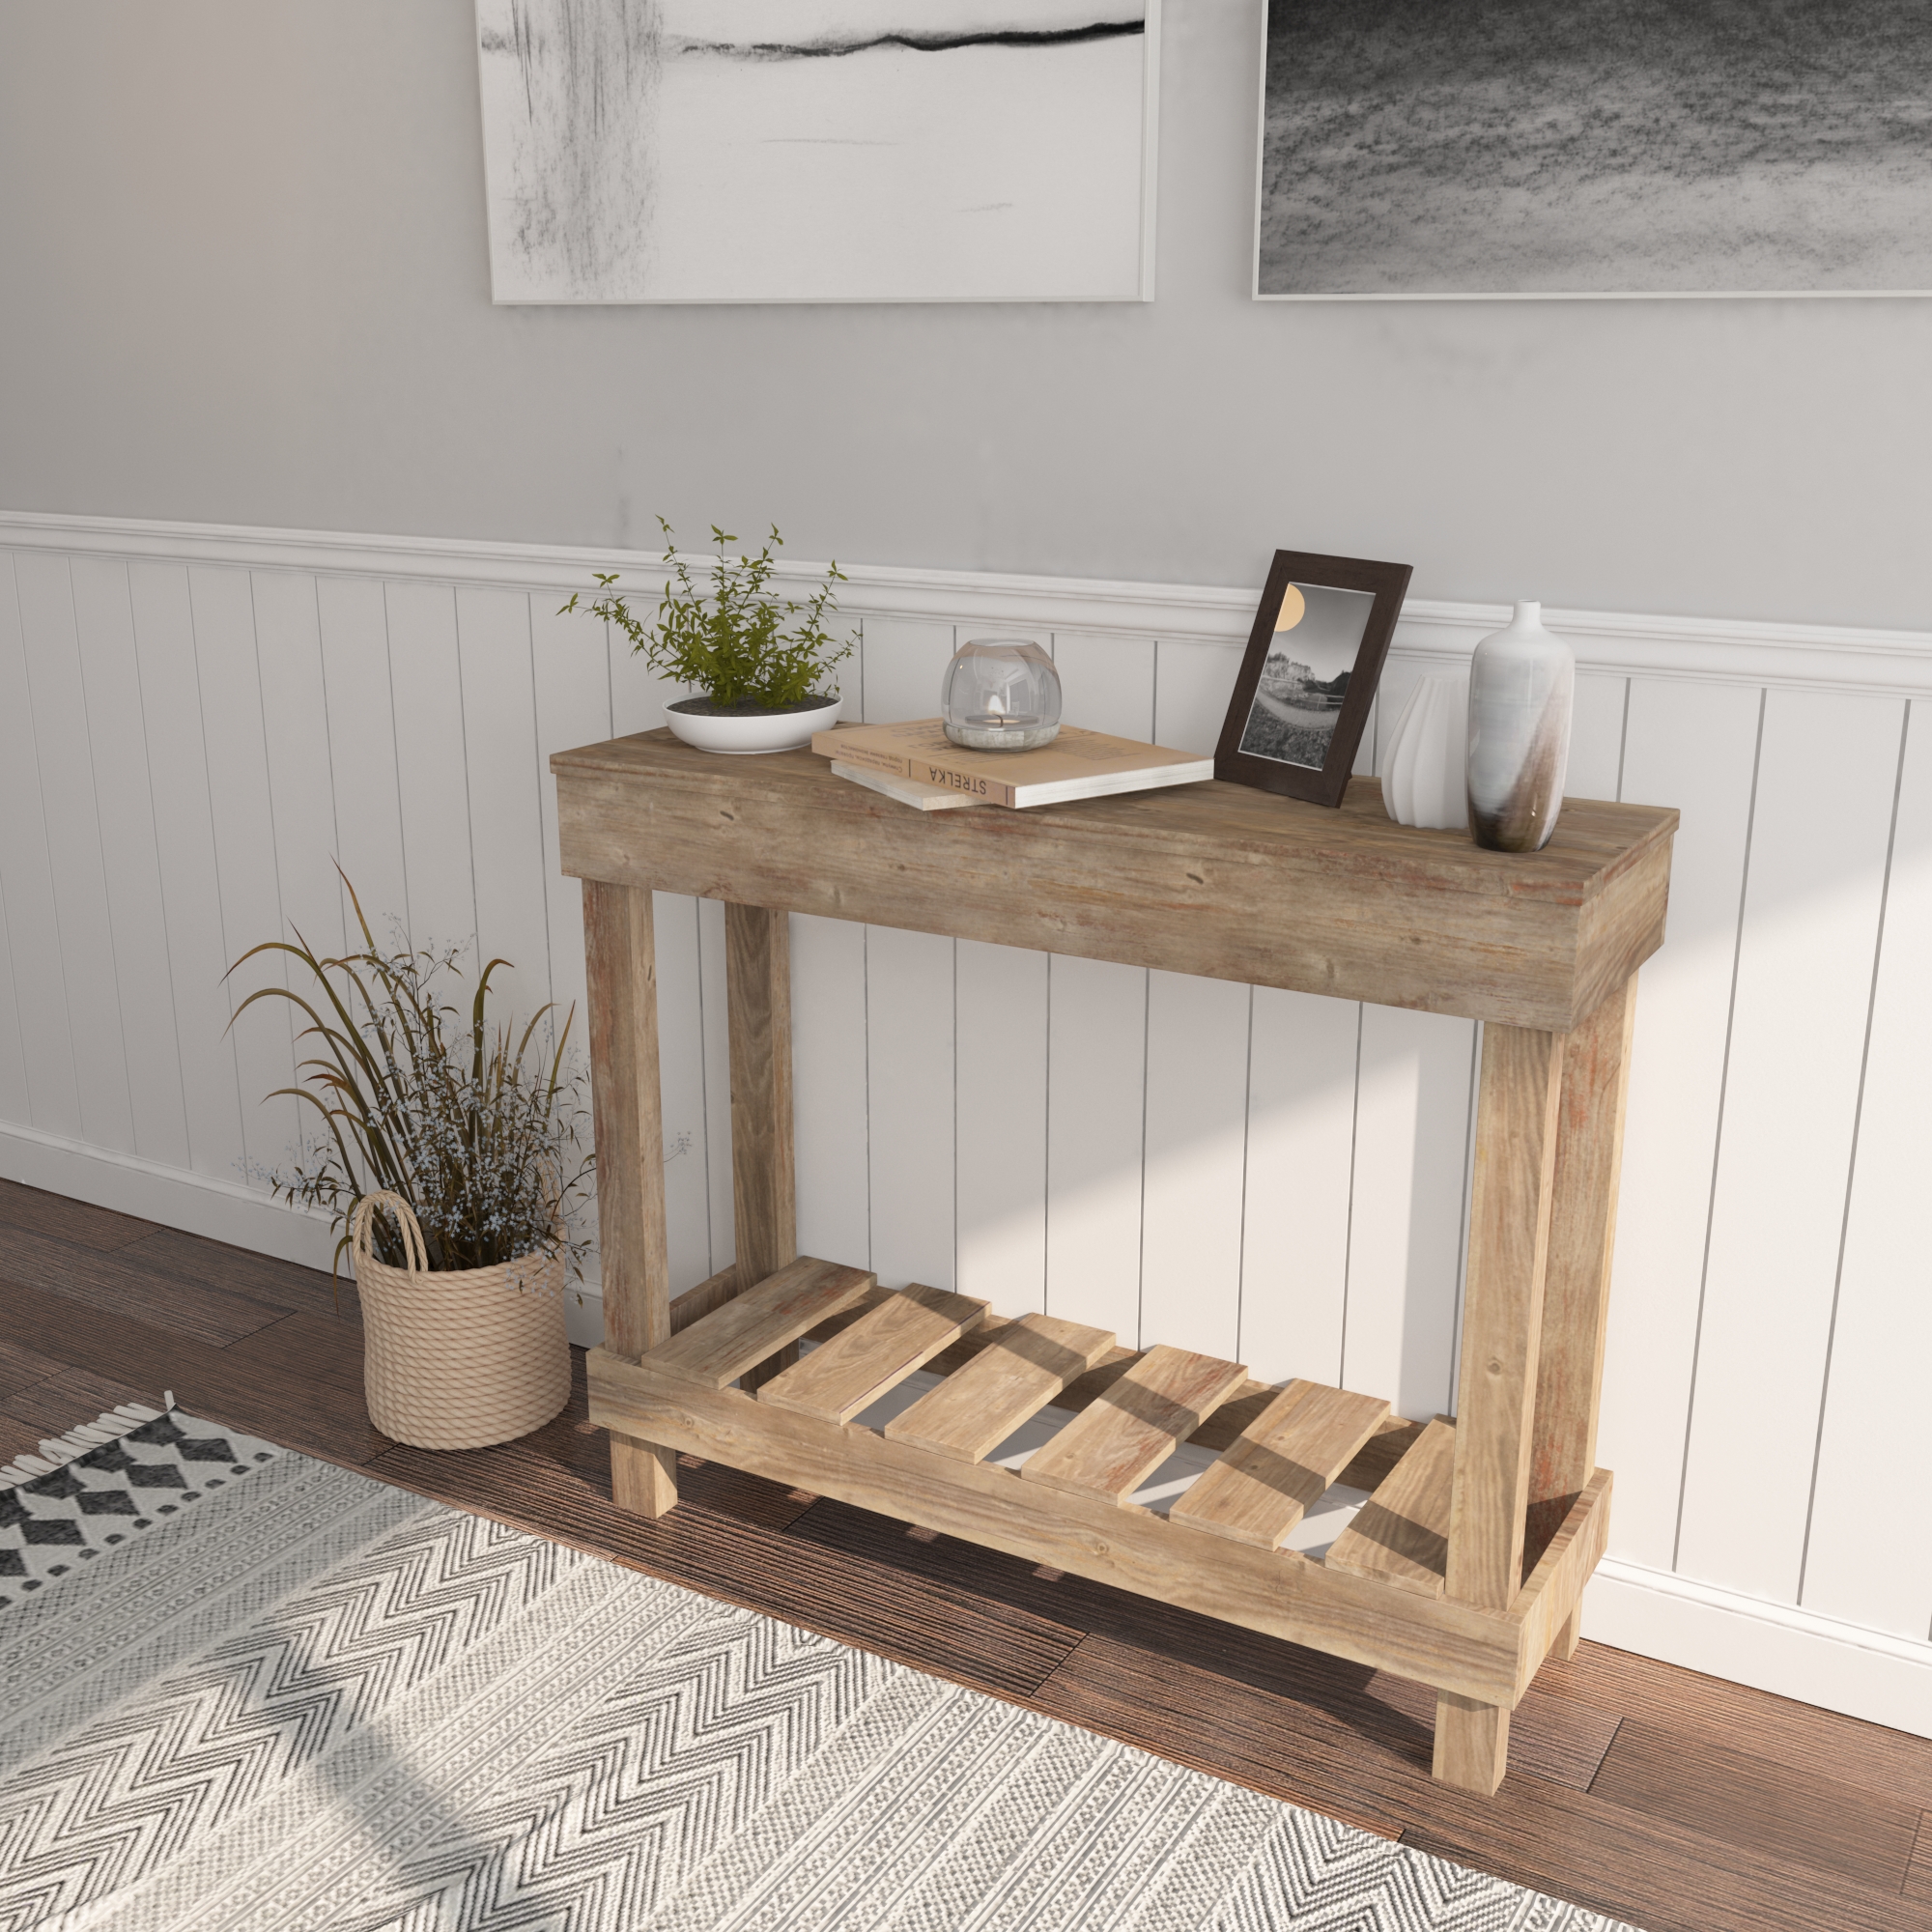 Woven Paths Farmhouse Rustic Wood Small Entryway or Living Room Sofa Table, Brown - image 4 of 4